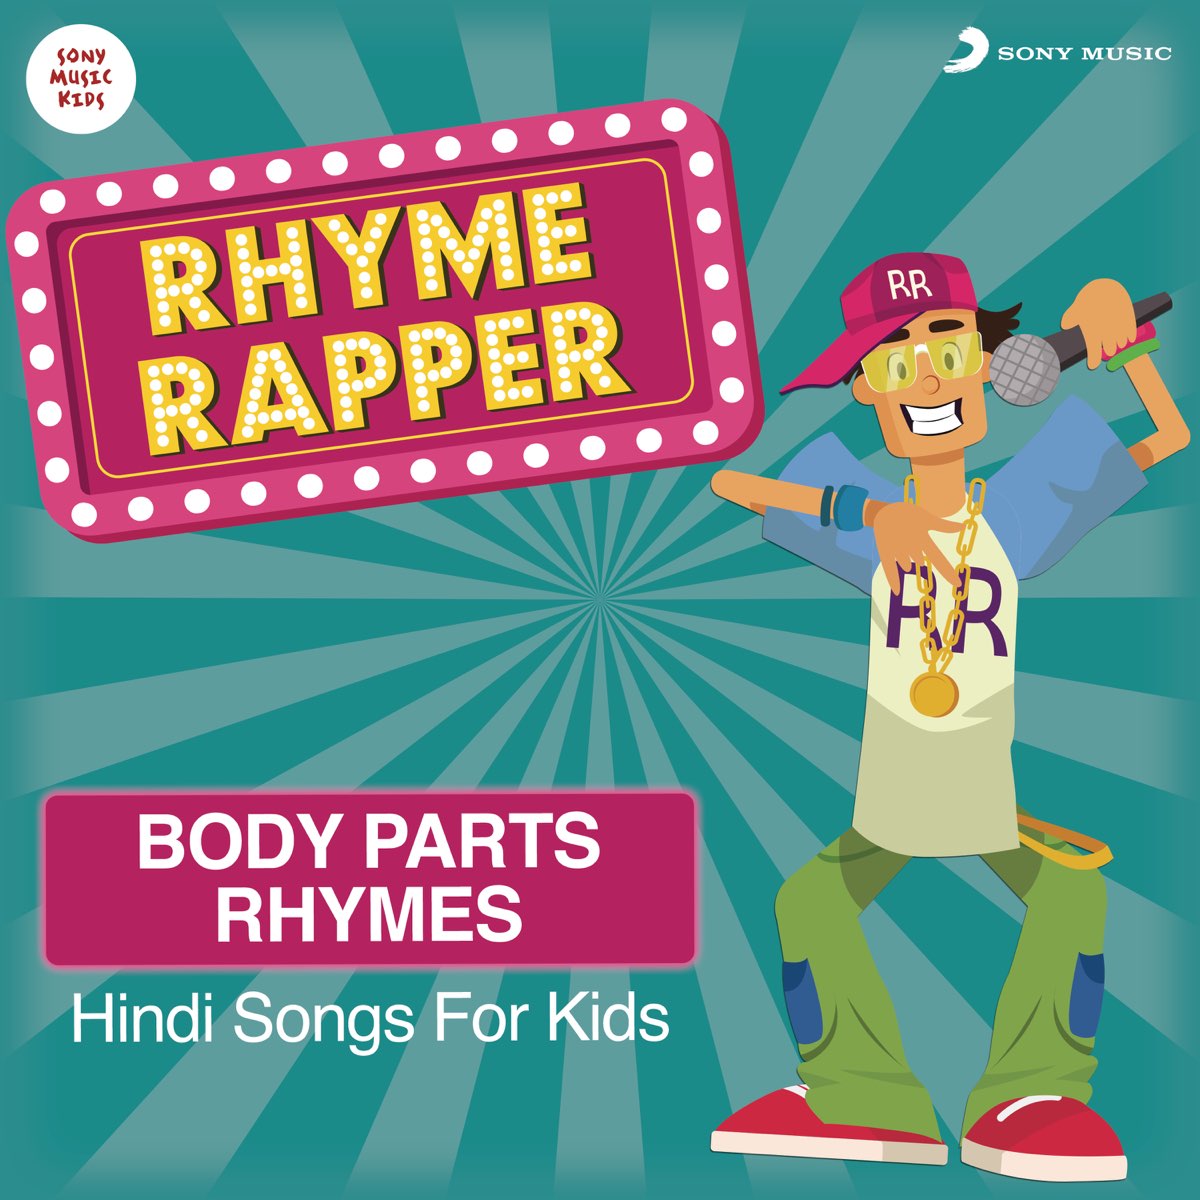 Rhyme Rapper: Hindi Songs for Kids (Body Parts) by Sayantan Bhattacharya on  Apple Music